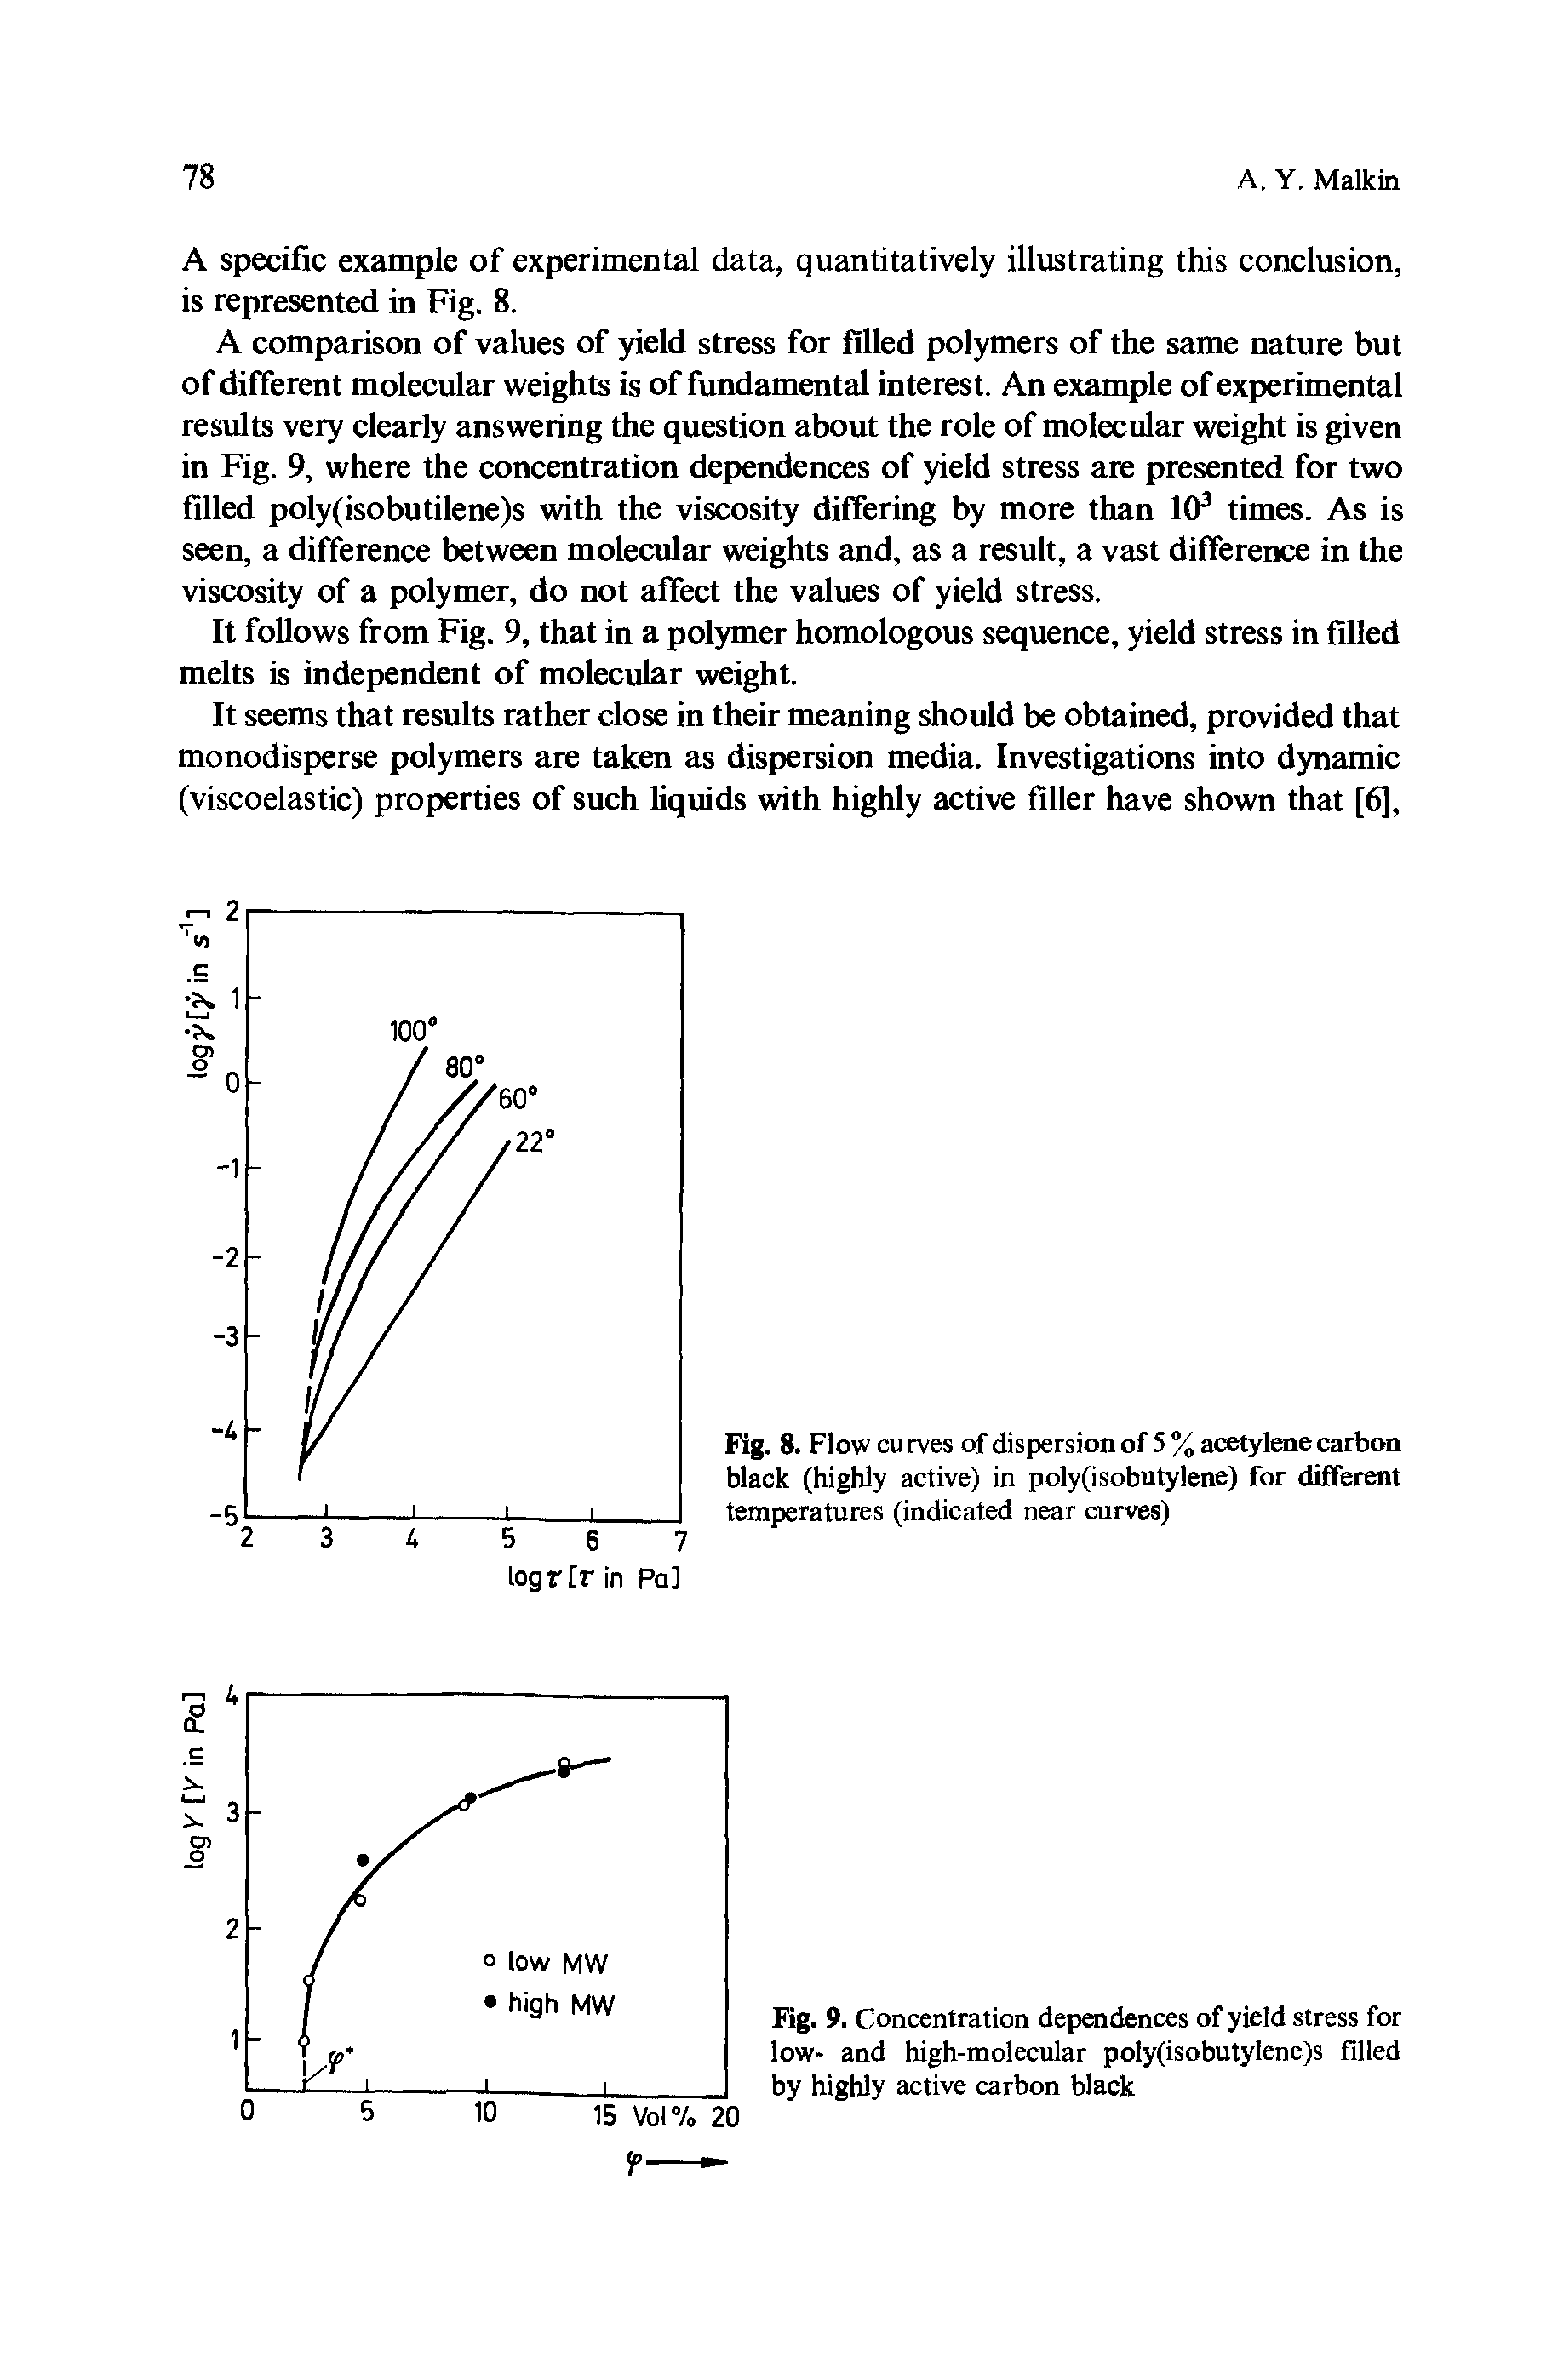 Fig. 8. Flow curves of dispersion of 5 % acetylene carbon black (highly active) in poly(isobutylene) for different temperatures (indicated near curves)...